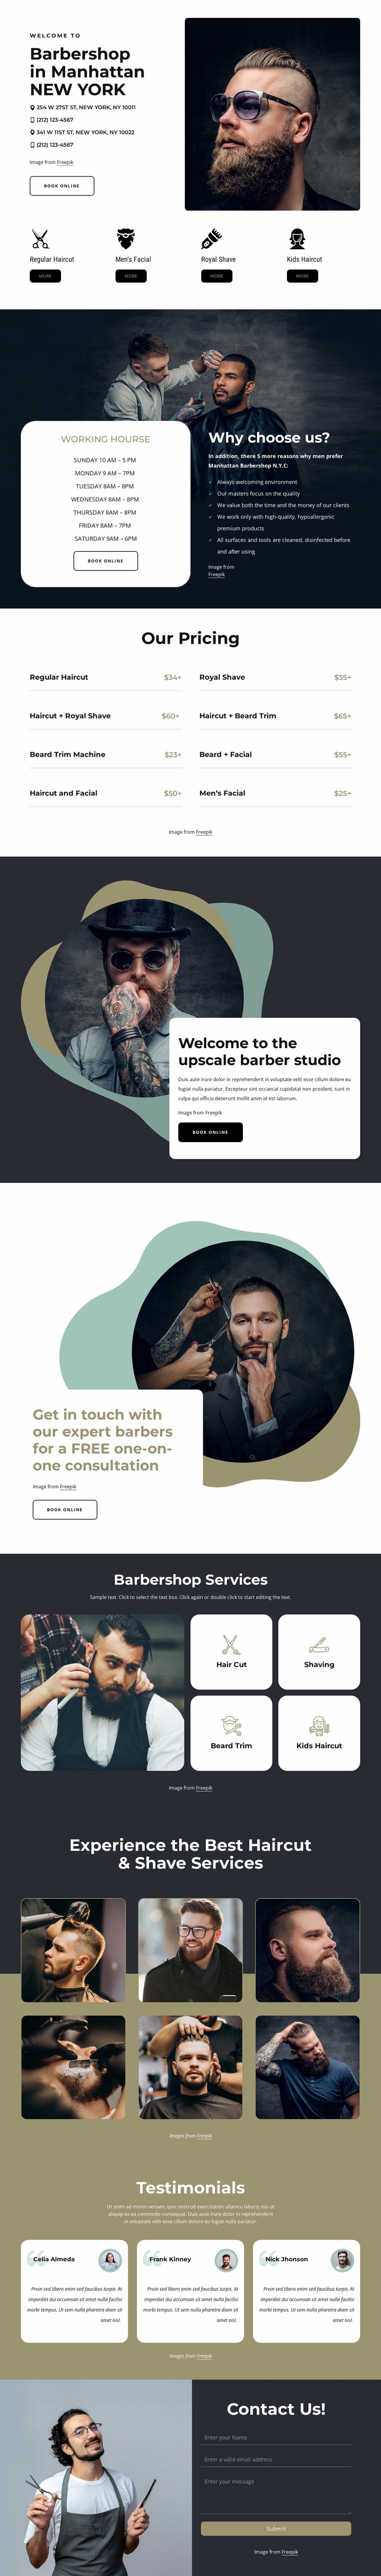 Hight quality grooming services Website Mockup